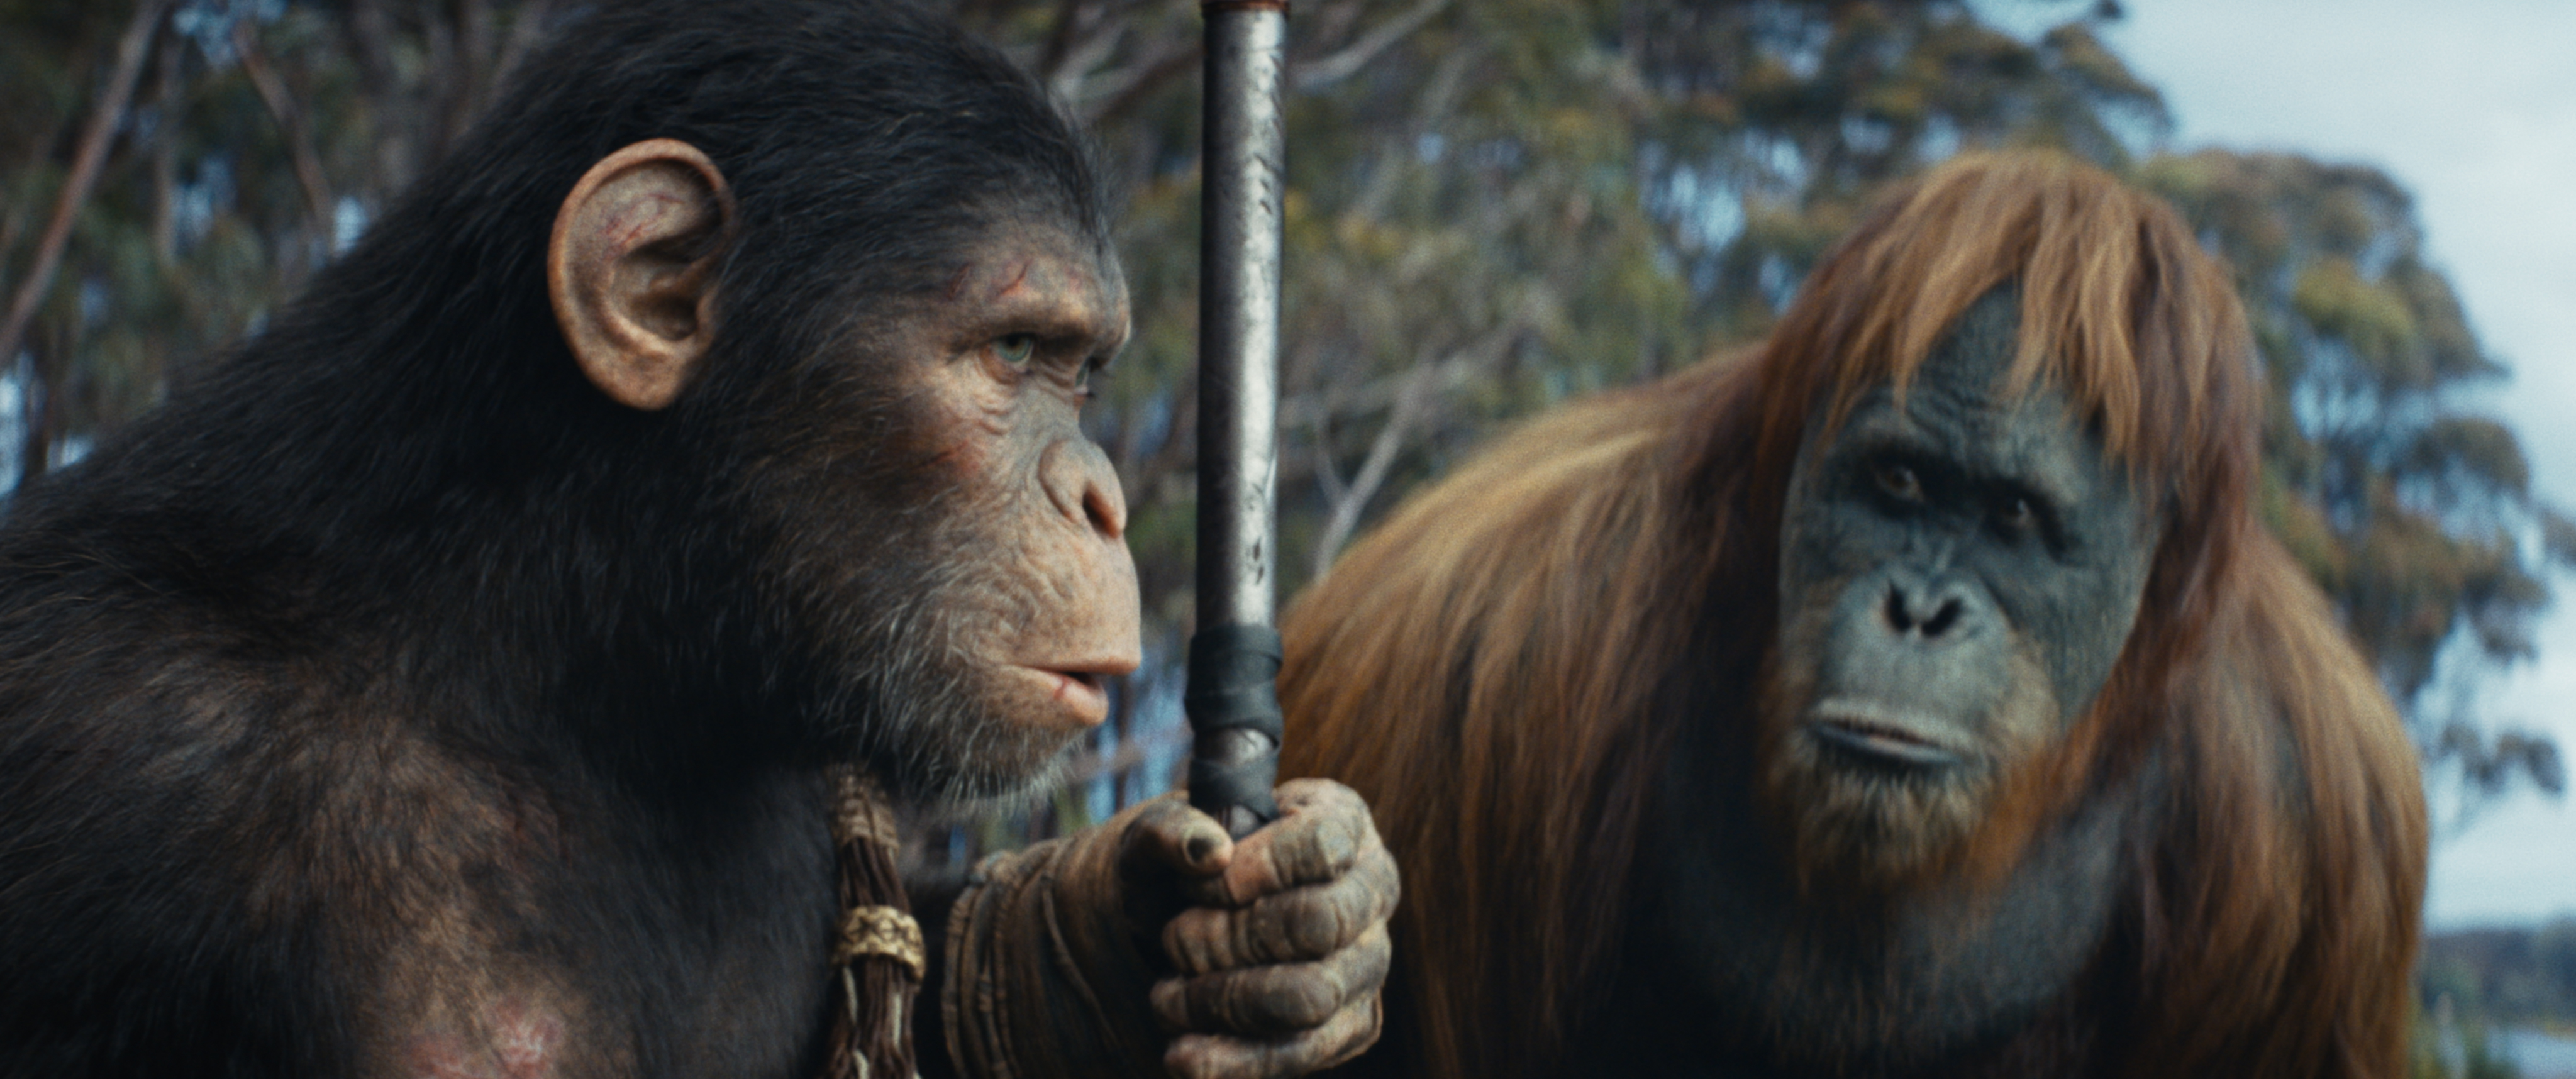 Noa (played by Owen Teague) stands by Raka (played by Peter Macon) in KINGDOM OF THE PLANET OF THE APES.